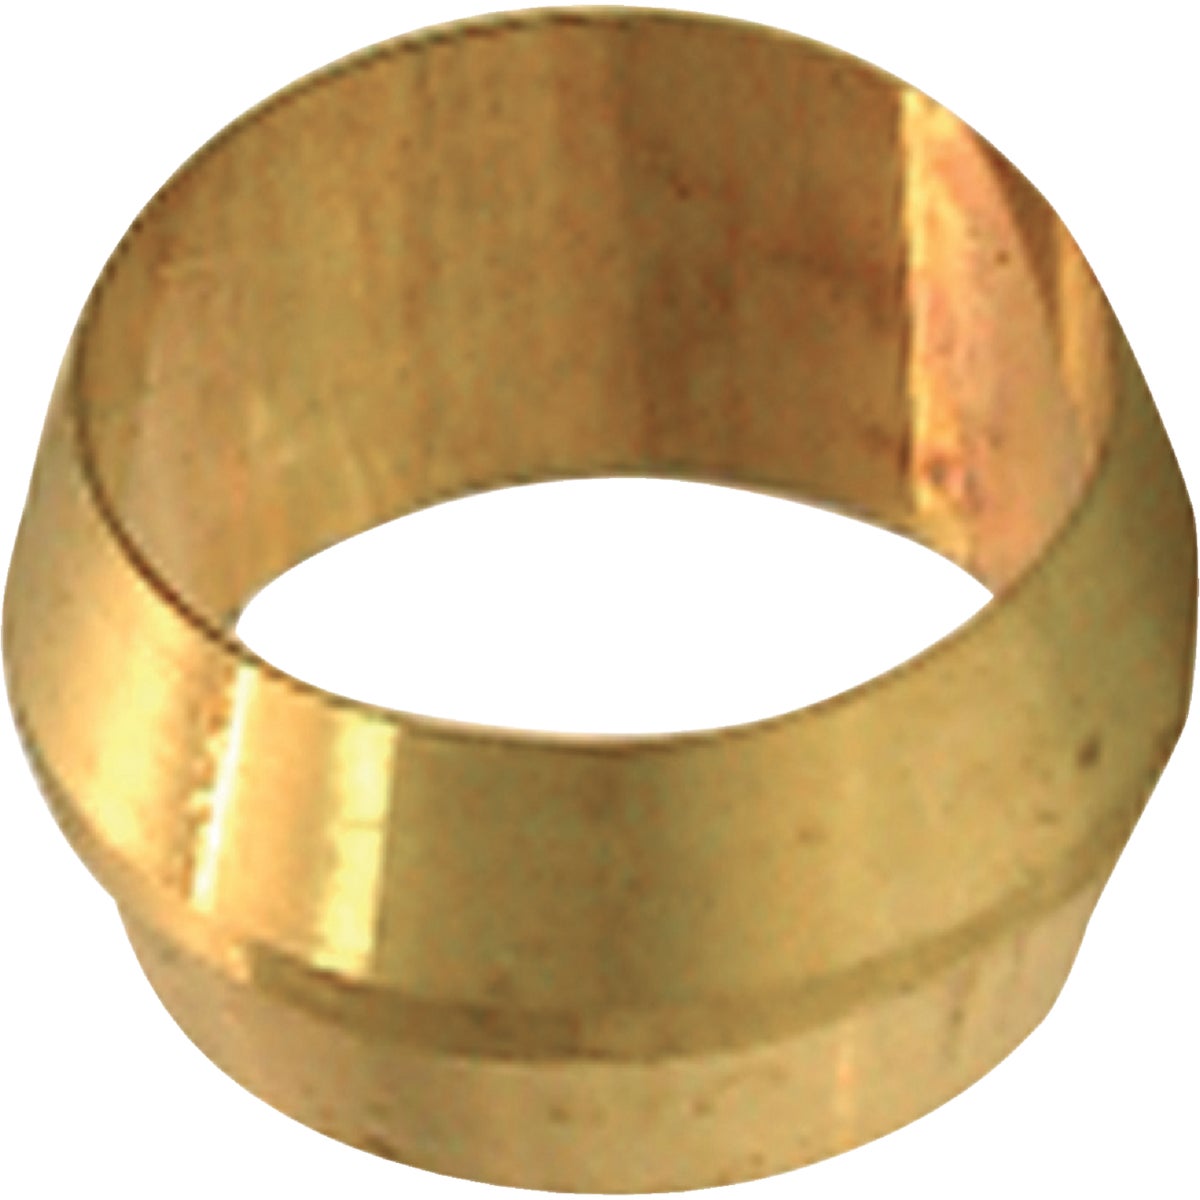 Lasco 5/16 In. Brass Compression Sleeve (2-Pack)